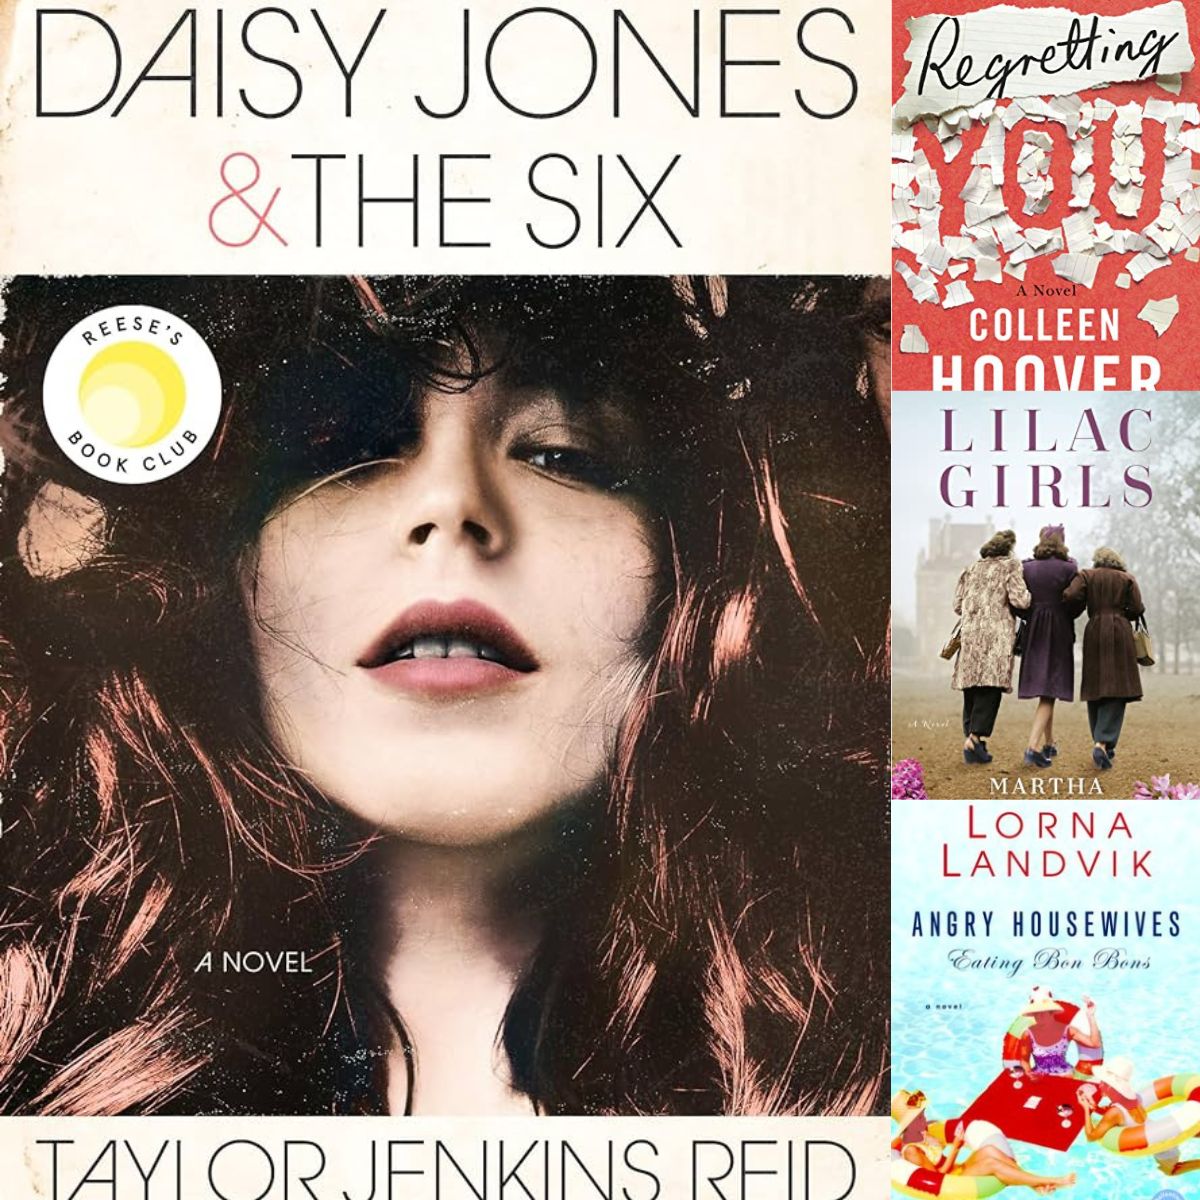 Collage of four book covers: Lilac Girls, Angry Housewives Eating Bon Bons, Regretting You, and Daisy Jones and the Six.